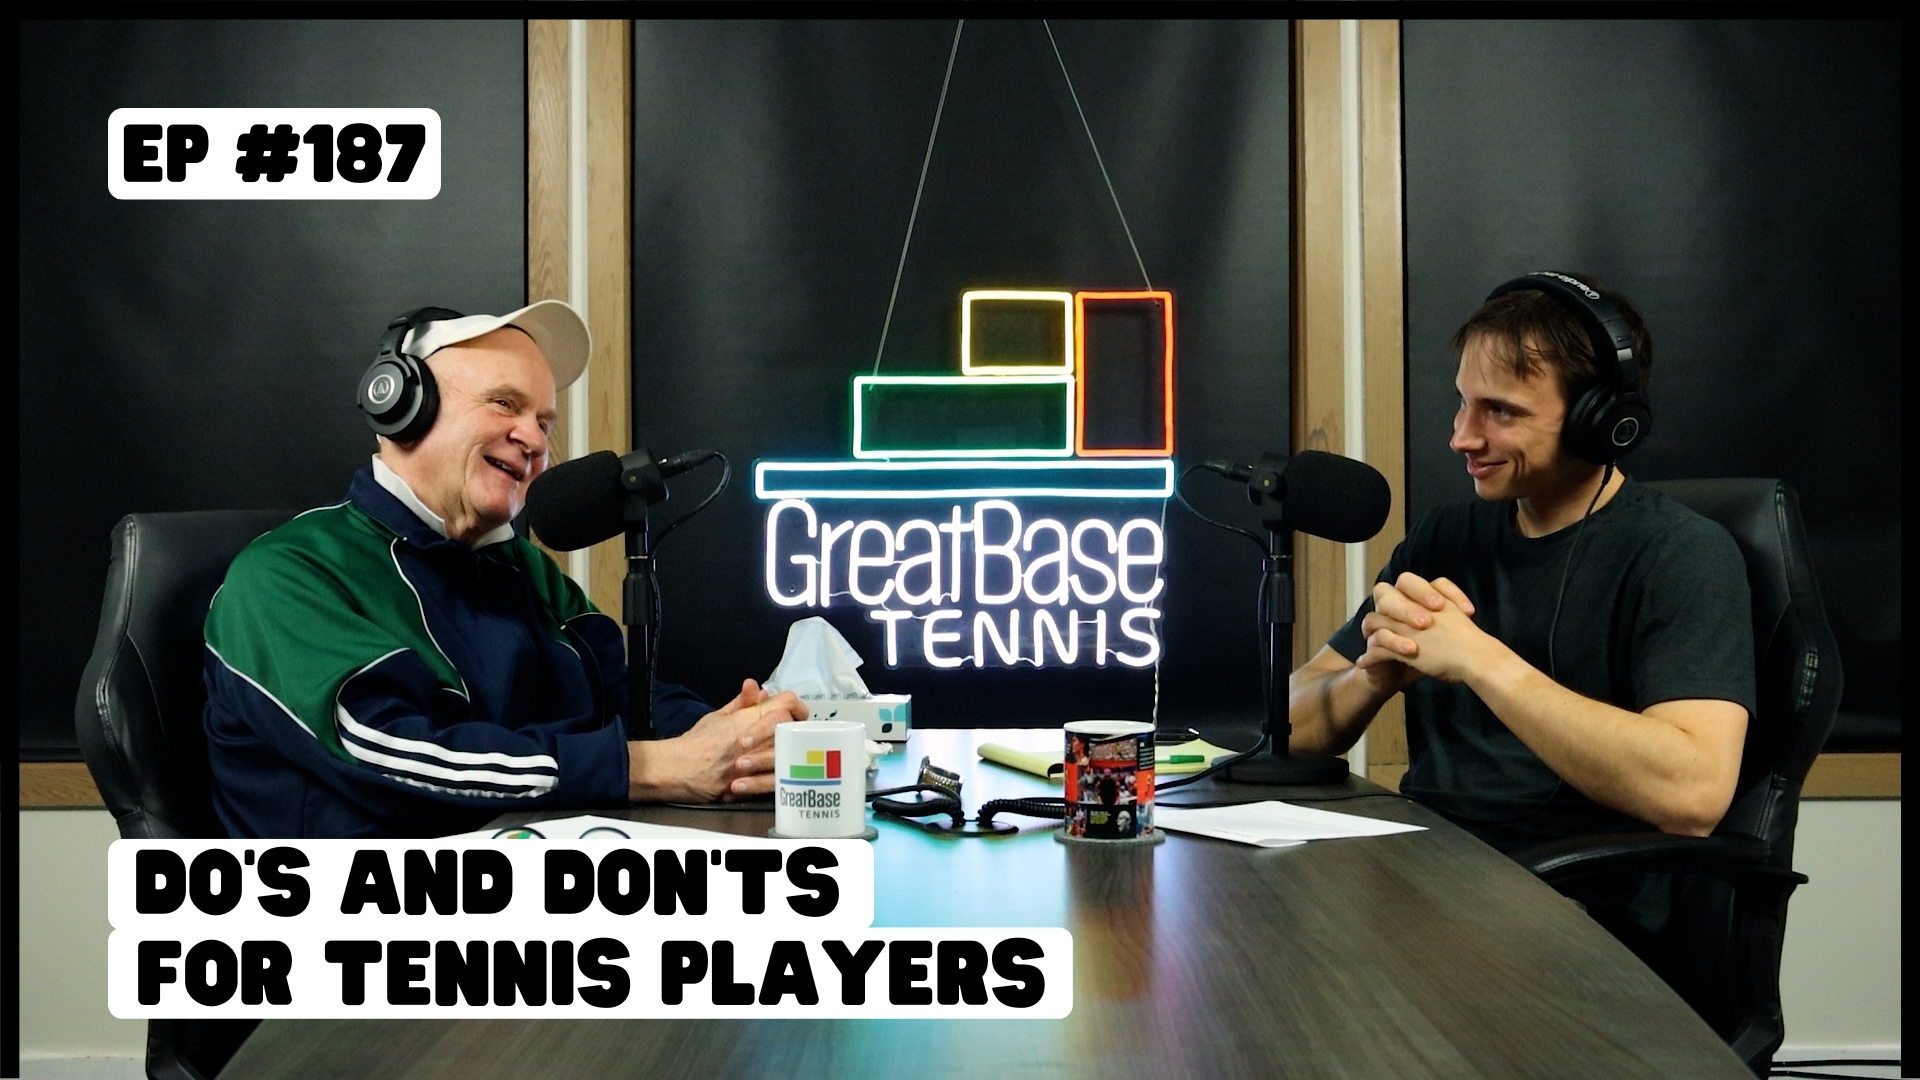 The GreatBase Tennis Podcast Episode 187 - Do's and Don'ts for Tennis Players